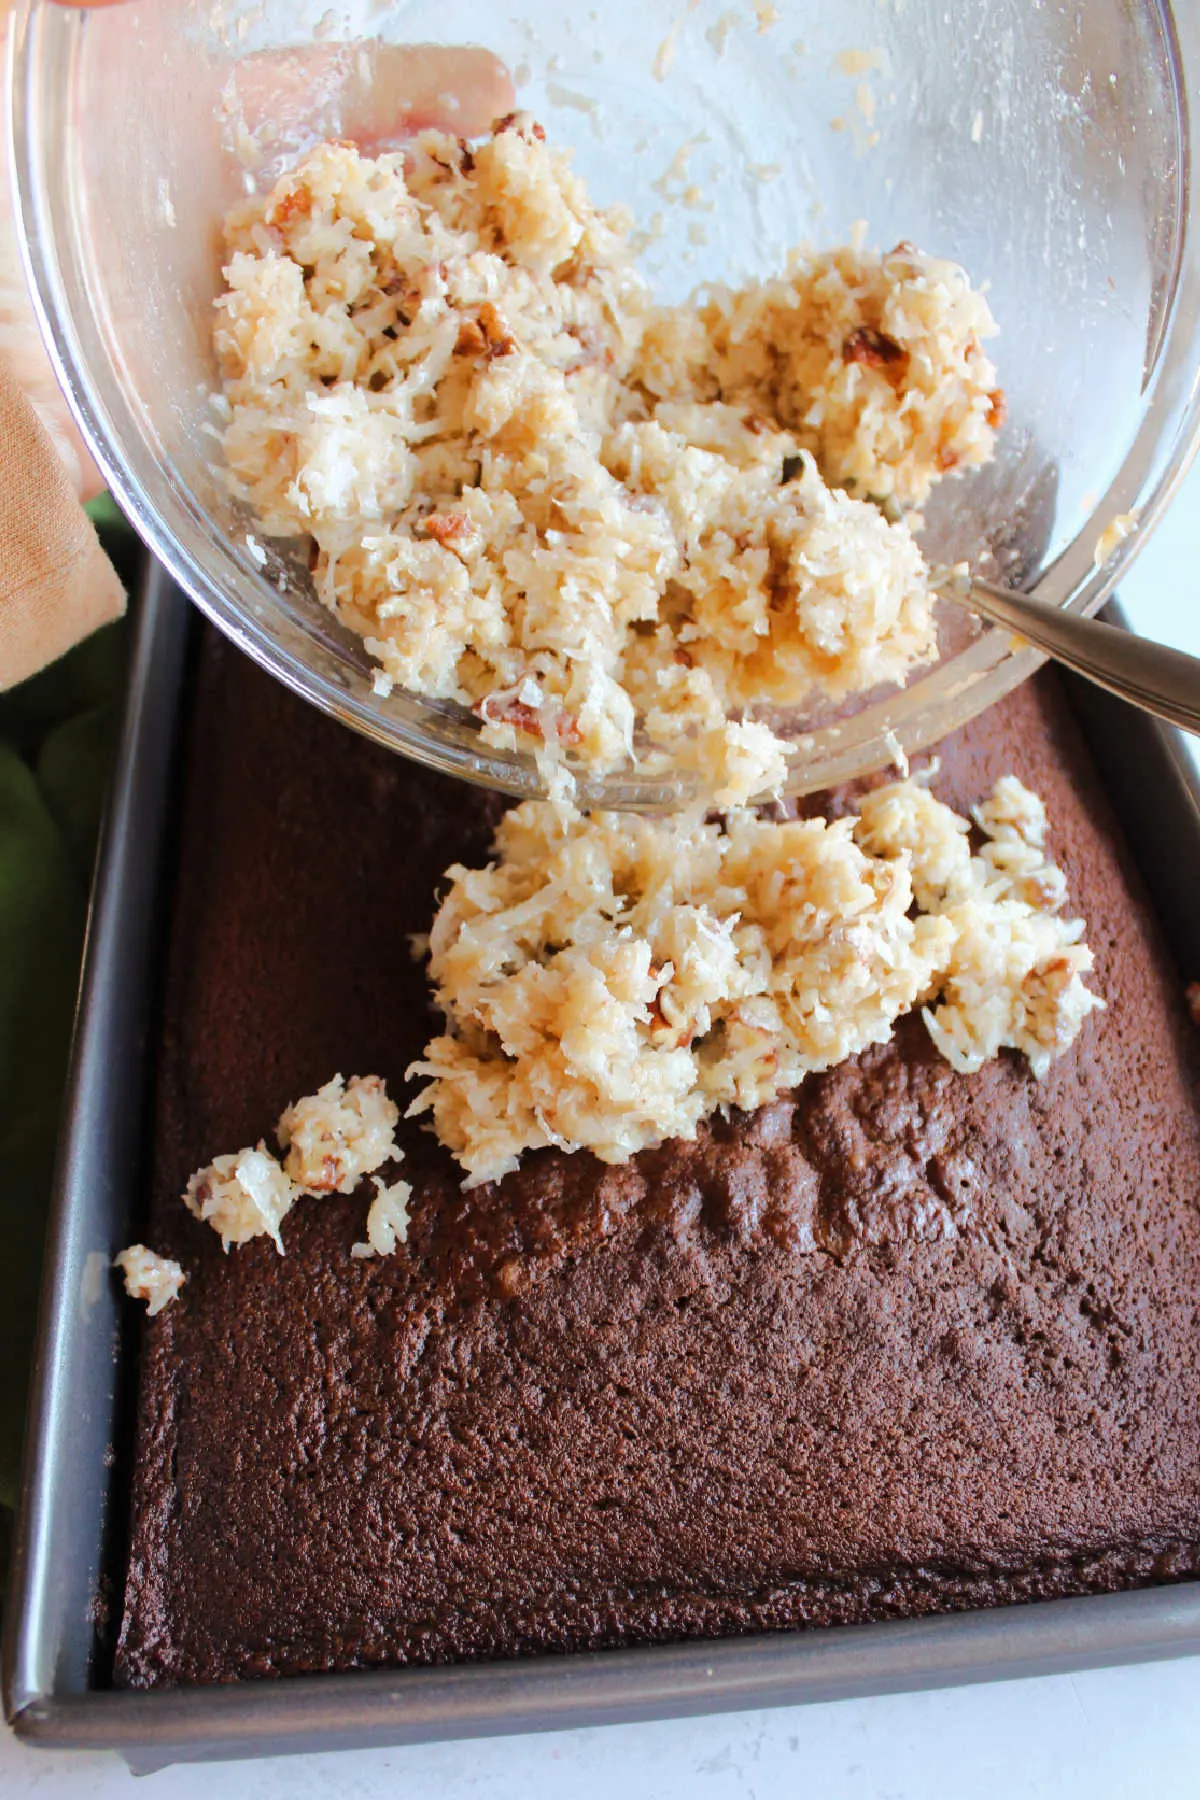 Spreading coconut mixture over cooked German chocolate cake.